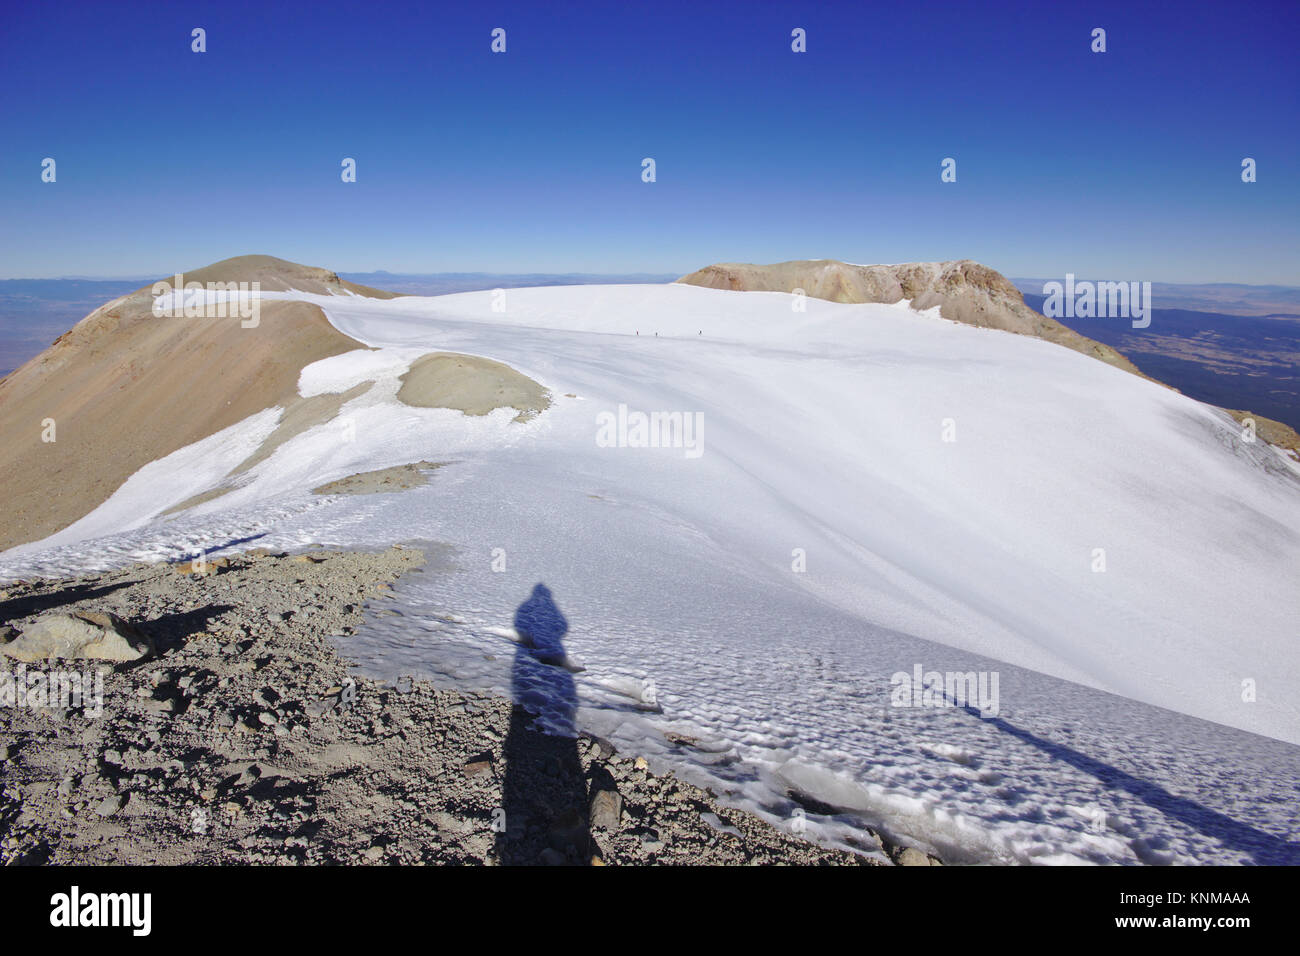 Iztaccíhuatl, view over glaciar filled crater to the main summit, Mexico Stock Photo